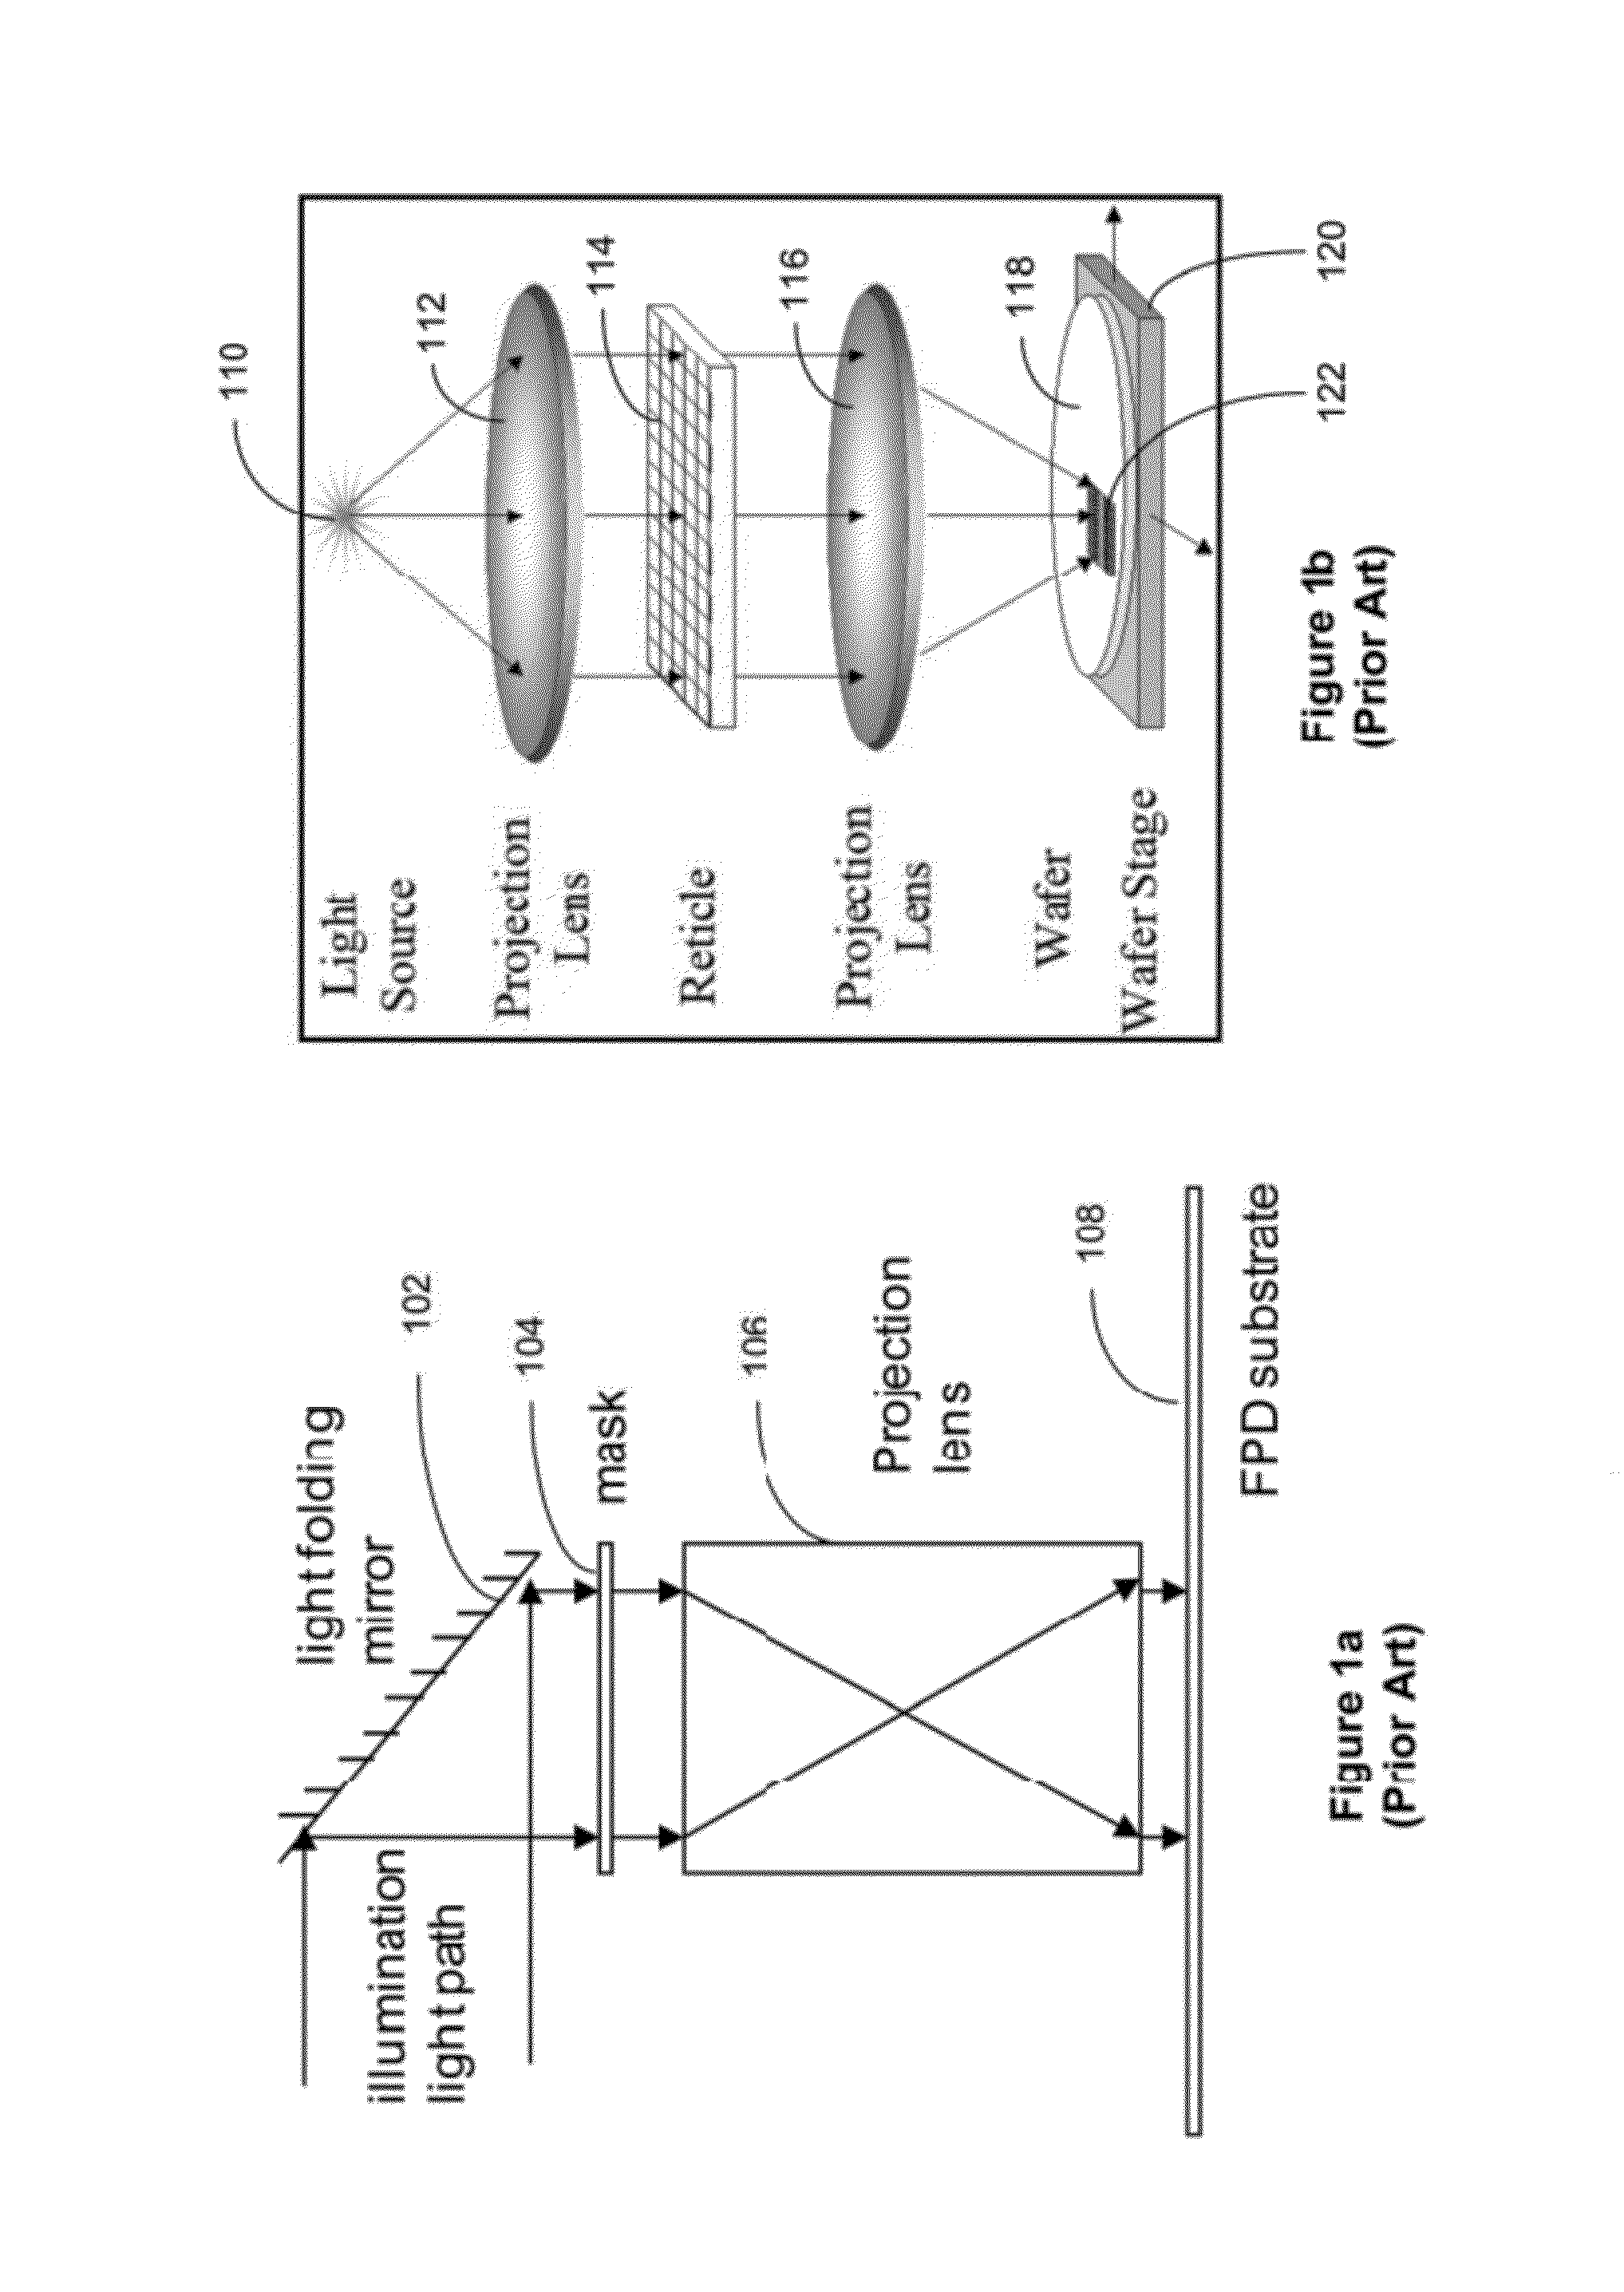 System and Method for Manufacturing Three Dimensional Integrated Circuits